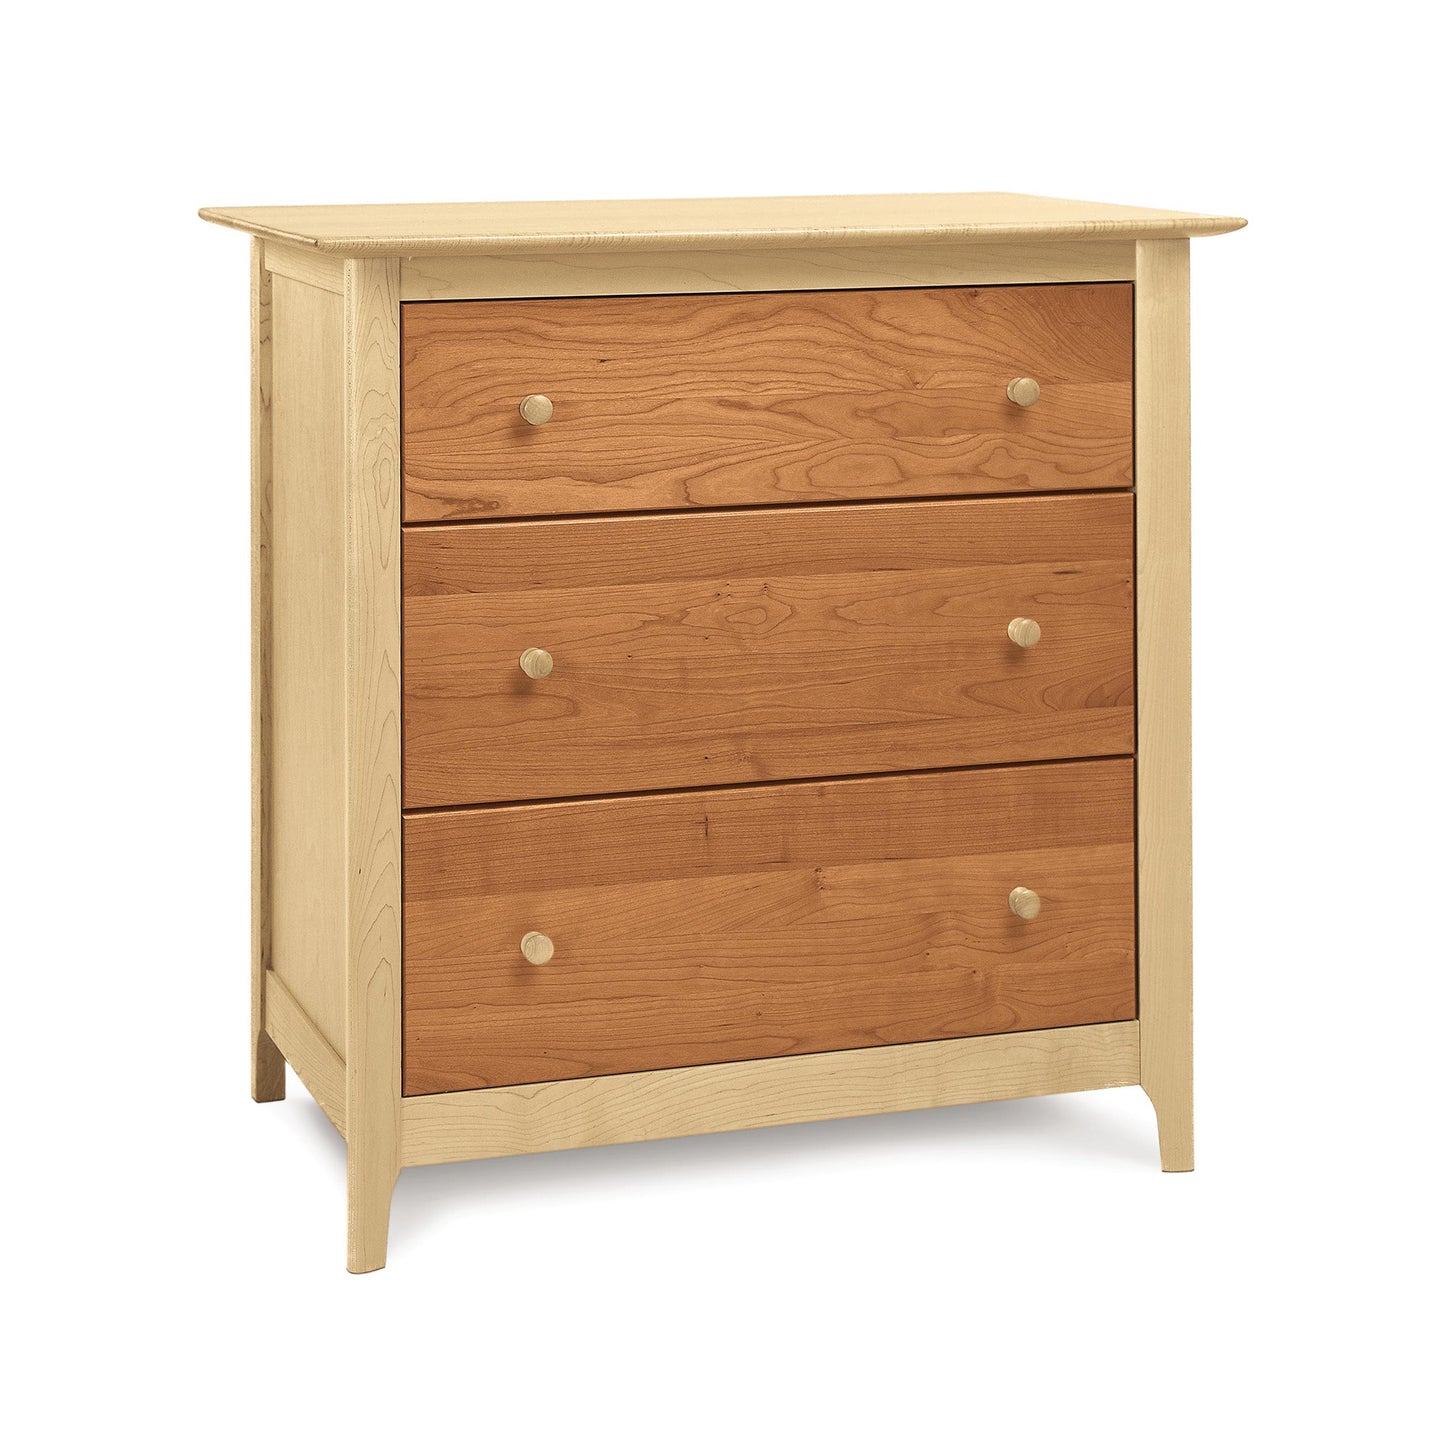 A natural cherry wood Sarah 3-Drawer Chest from Copeland Furniture isolated on a white background.